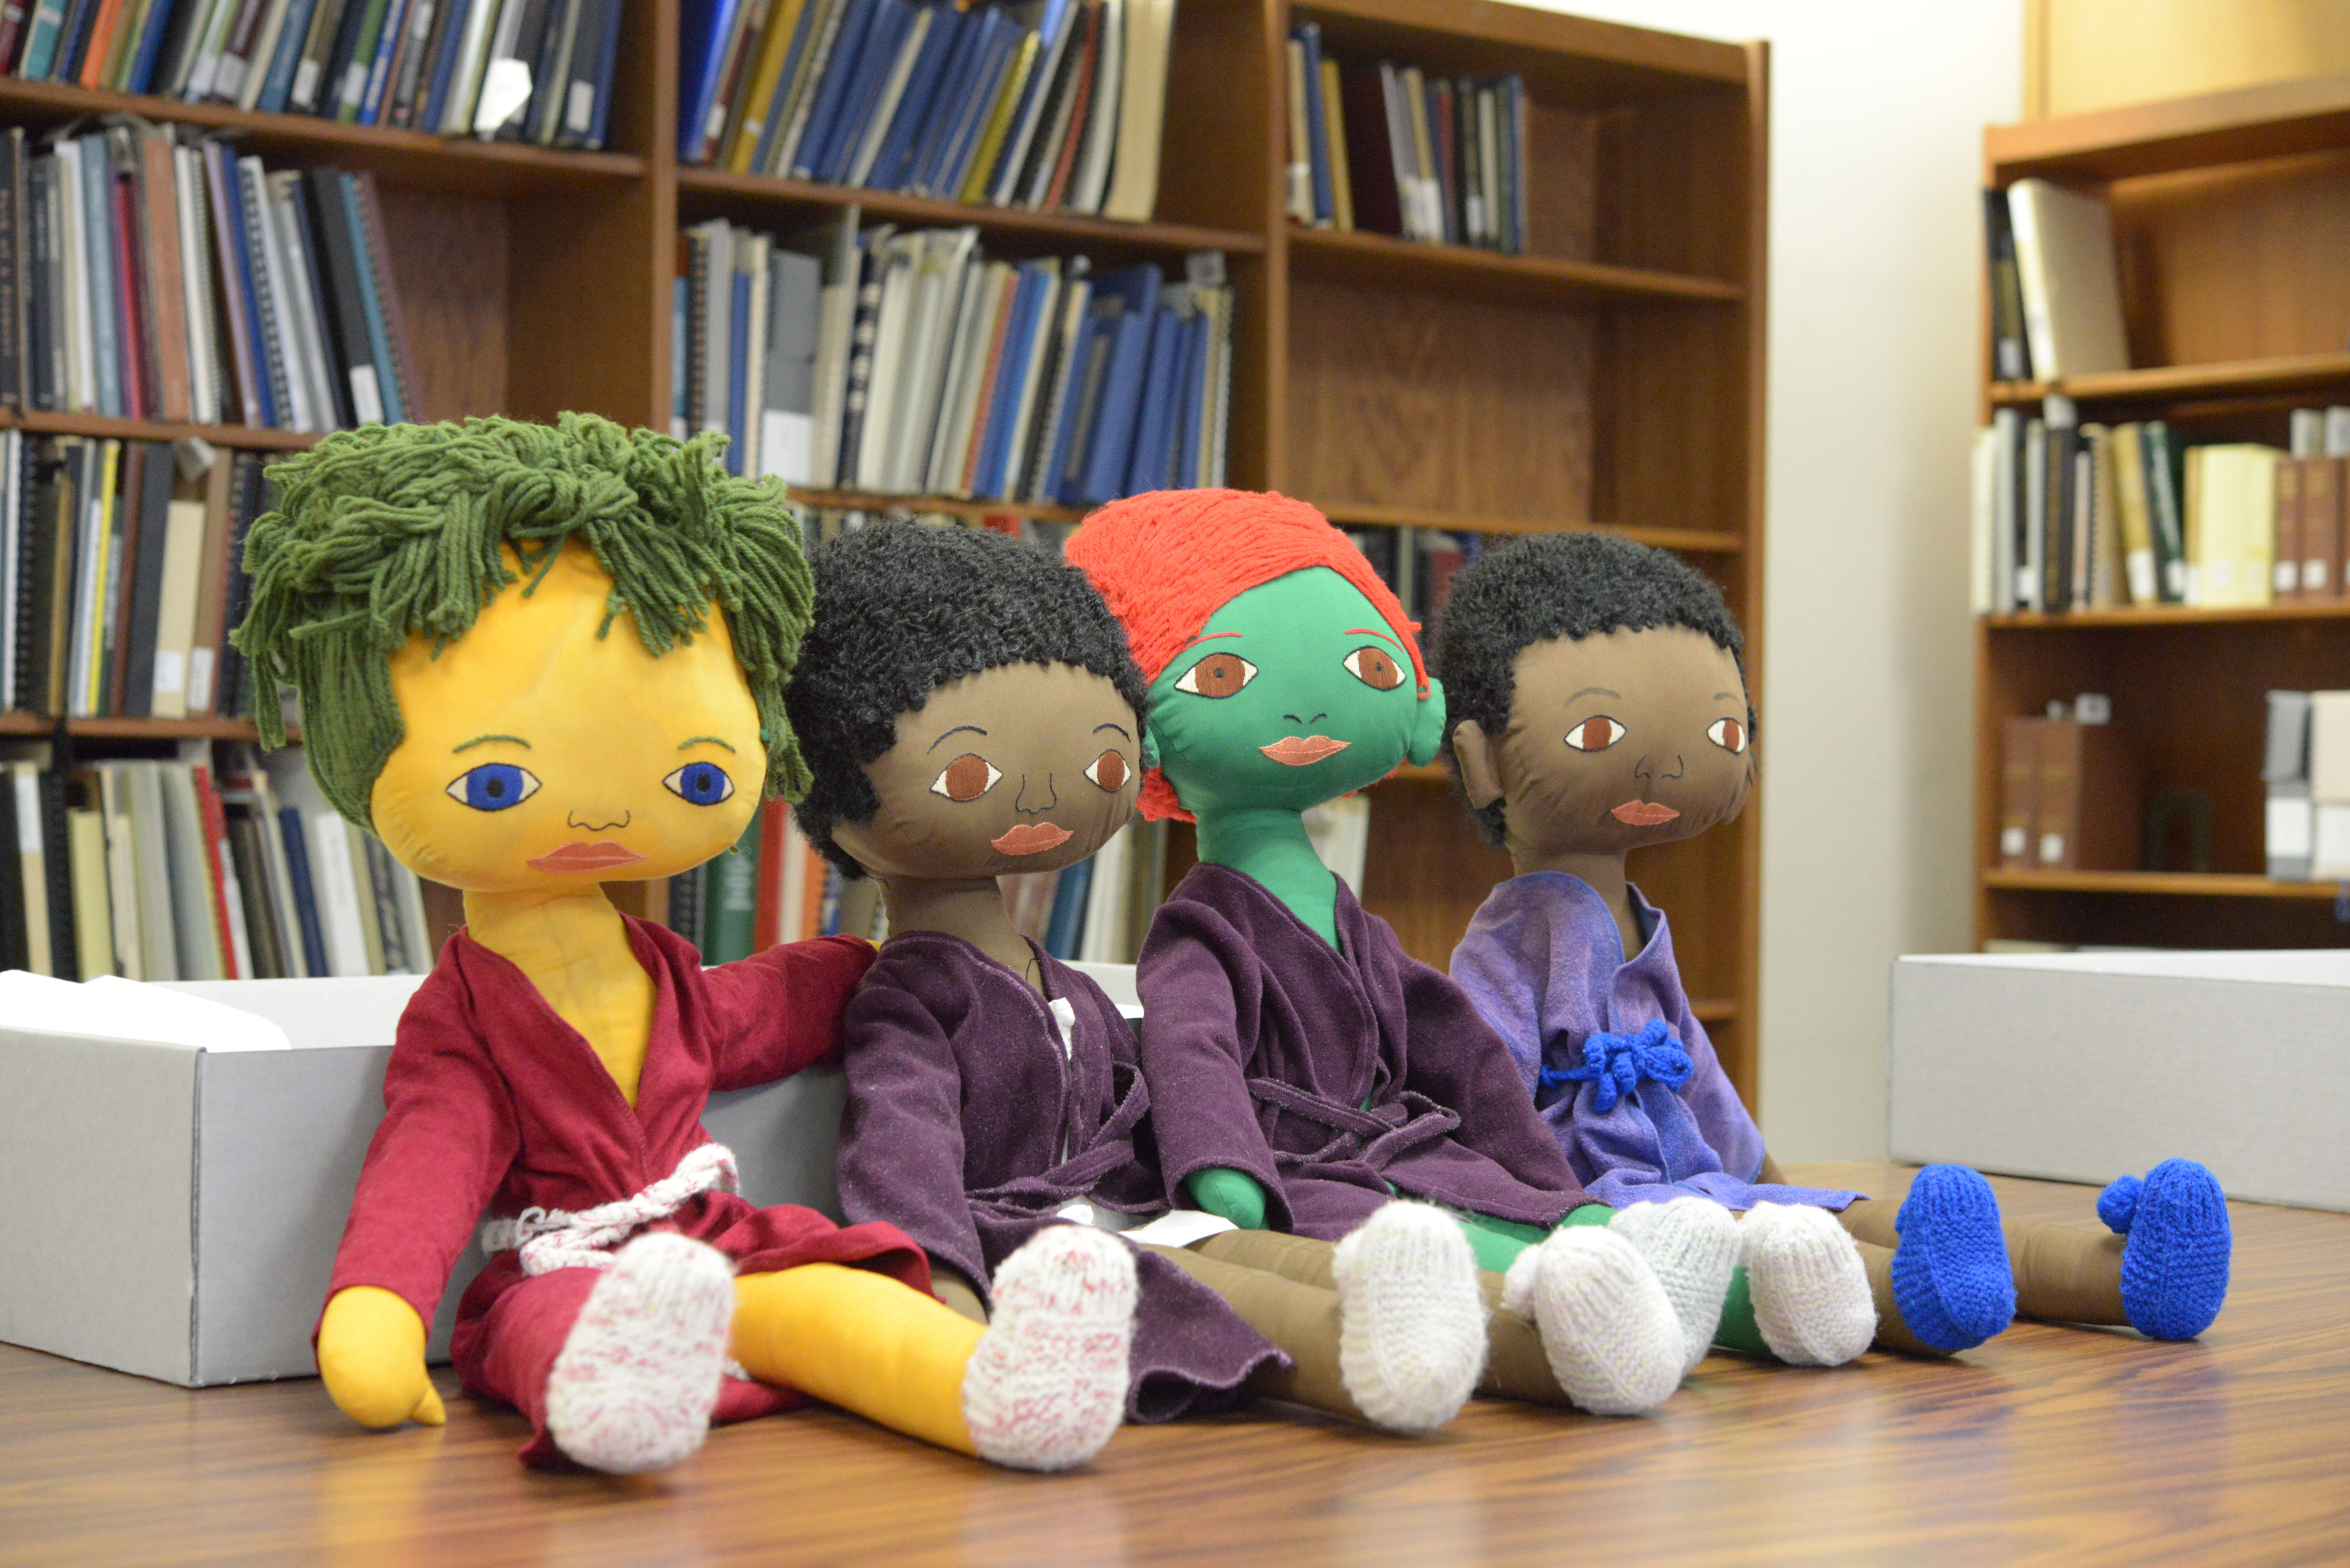 A photo of four cloth dolls of different colors (yellow, brown, green, and brown) wearing robes placed in a row on a table.